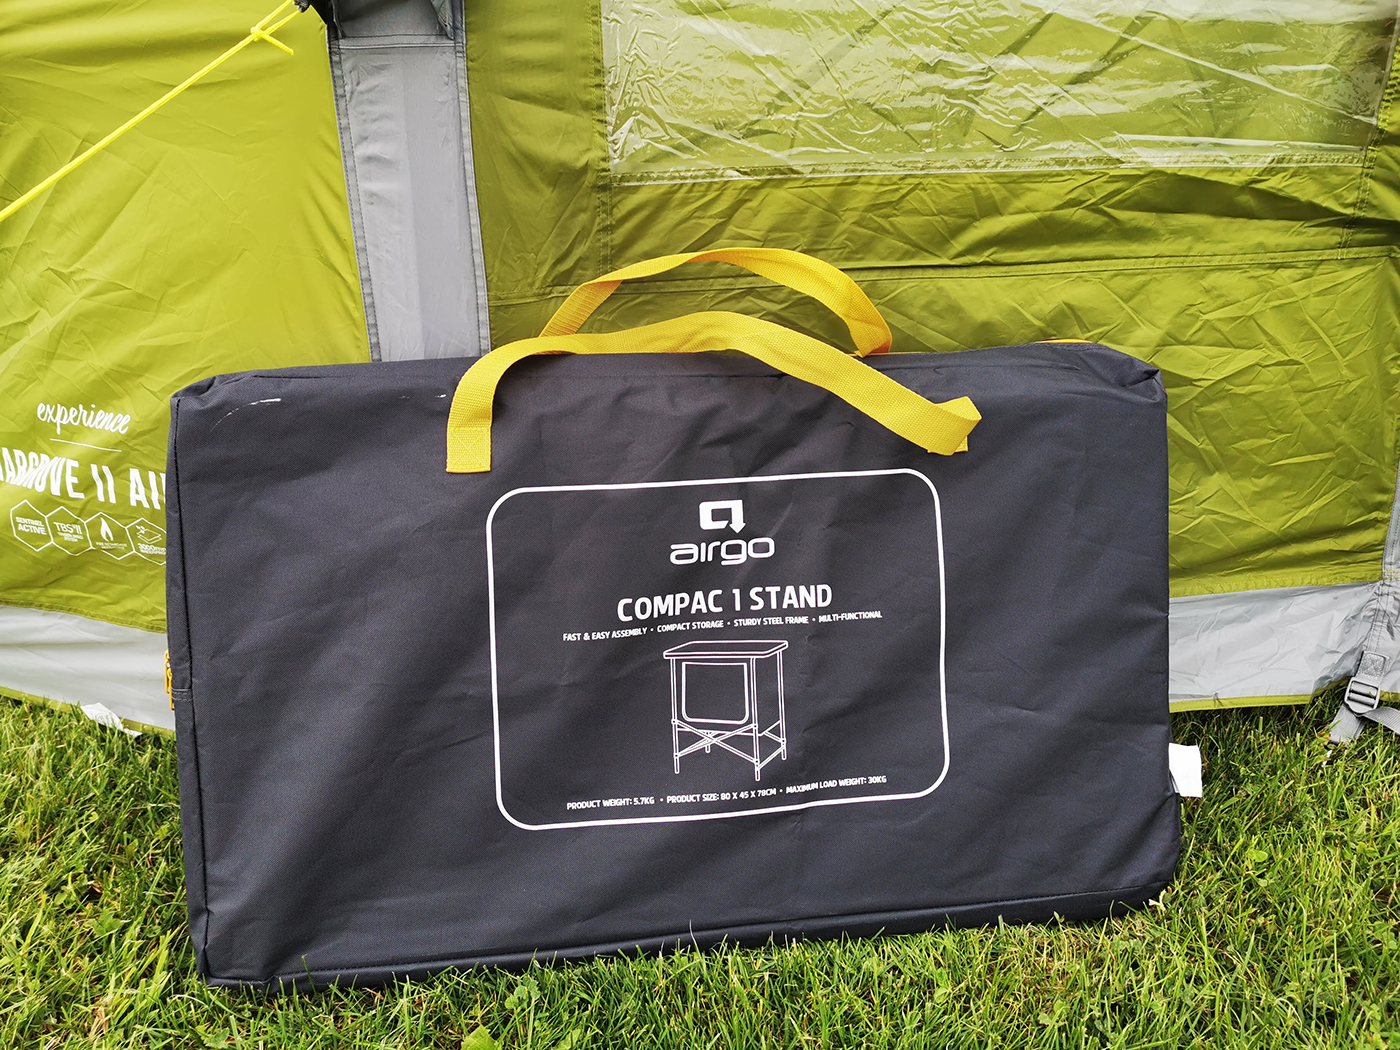 Review Airgo Compac 1 Camping Storage Stand From Go Outdoors